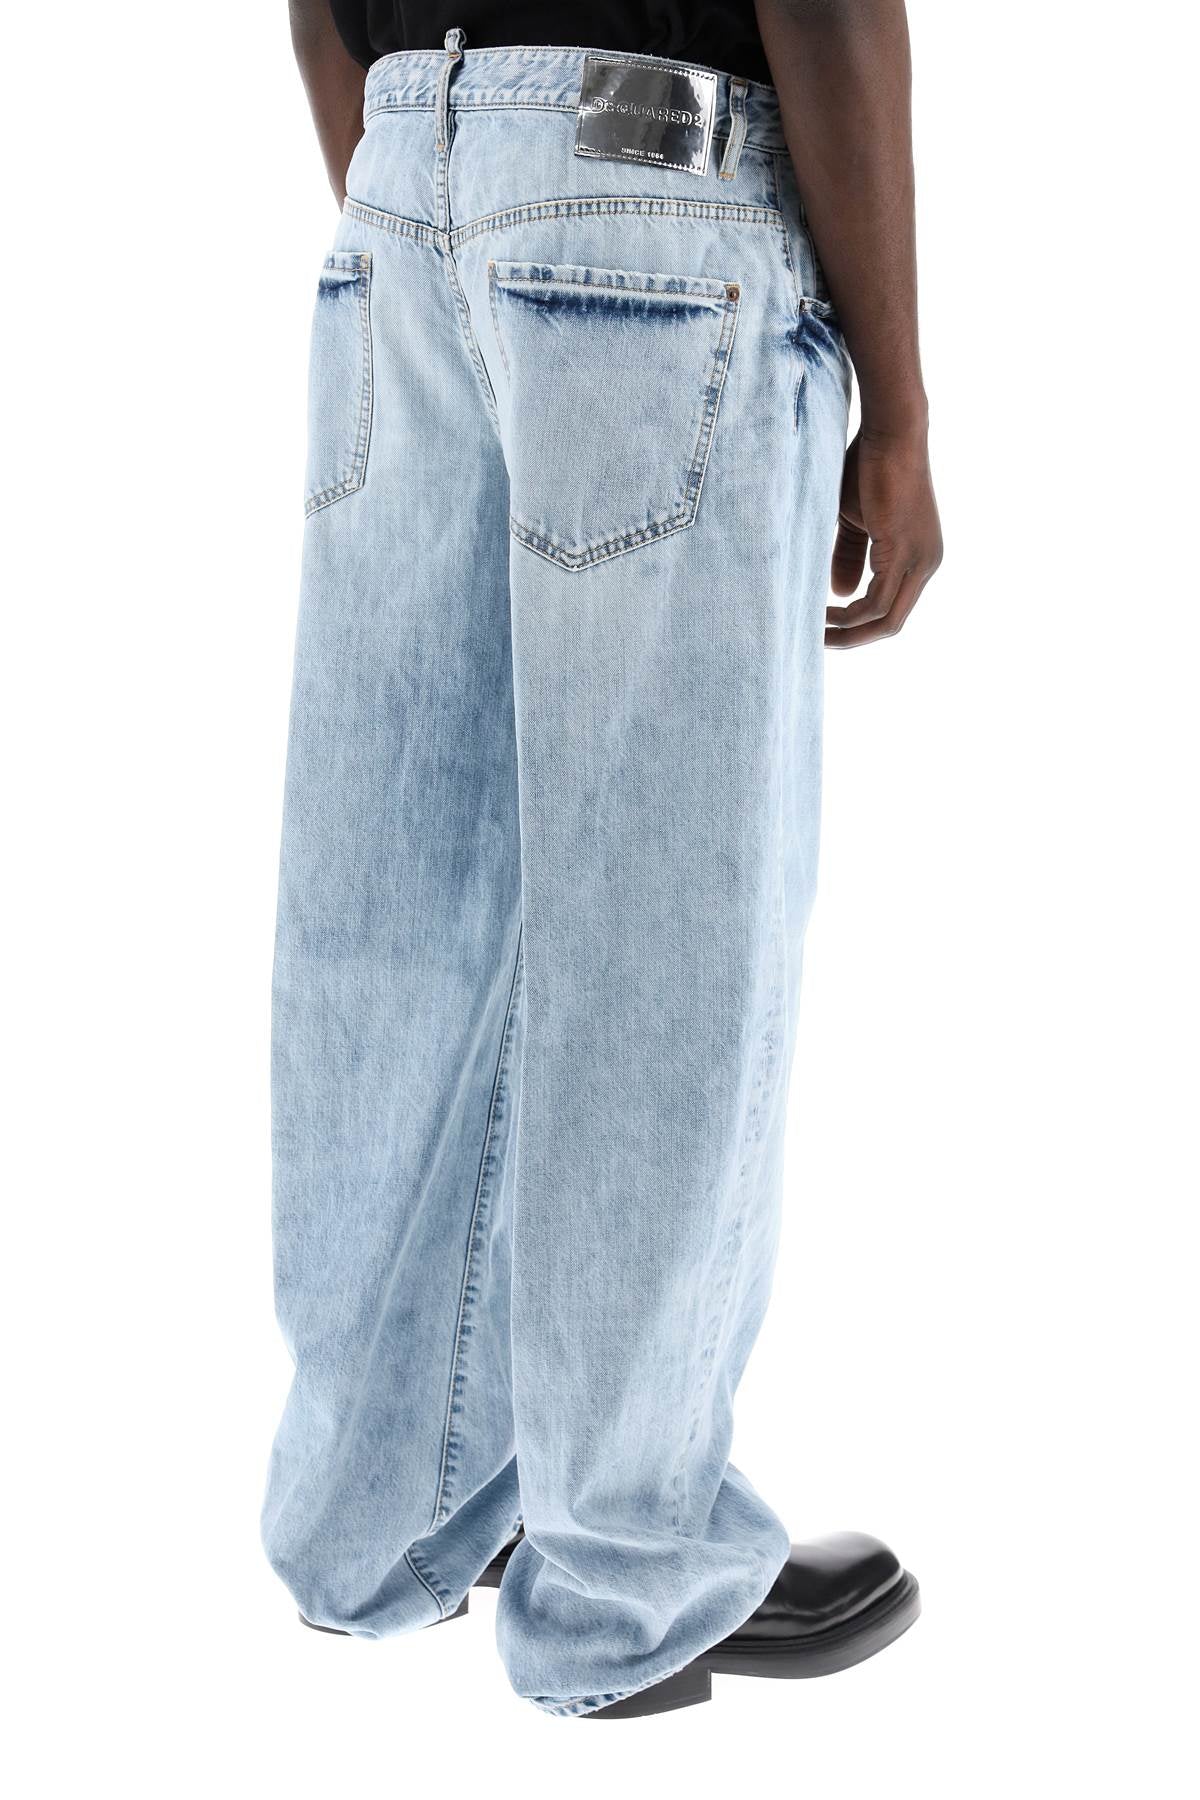 Dsquared2 Dsquared2 "oversized jeans with destroyed